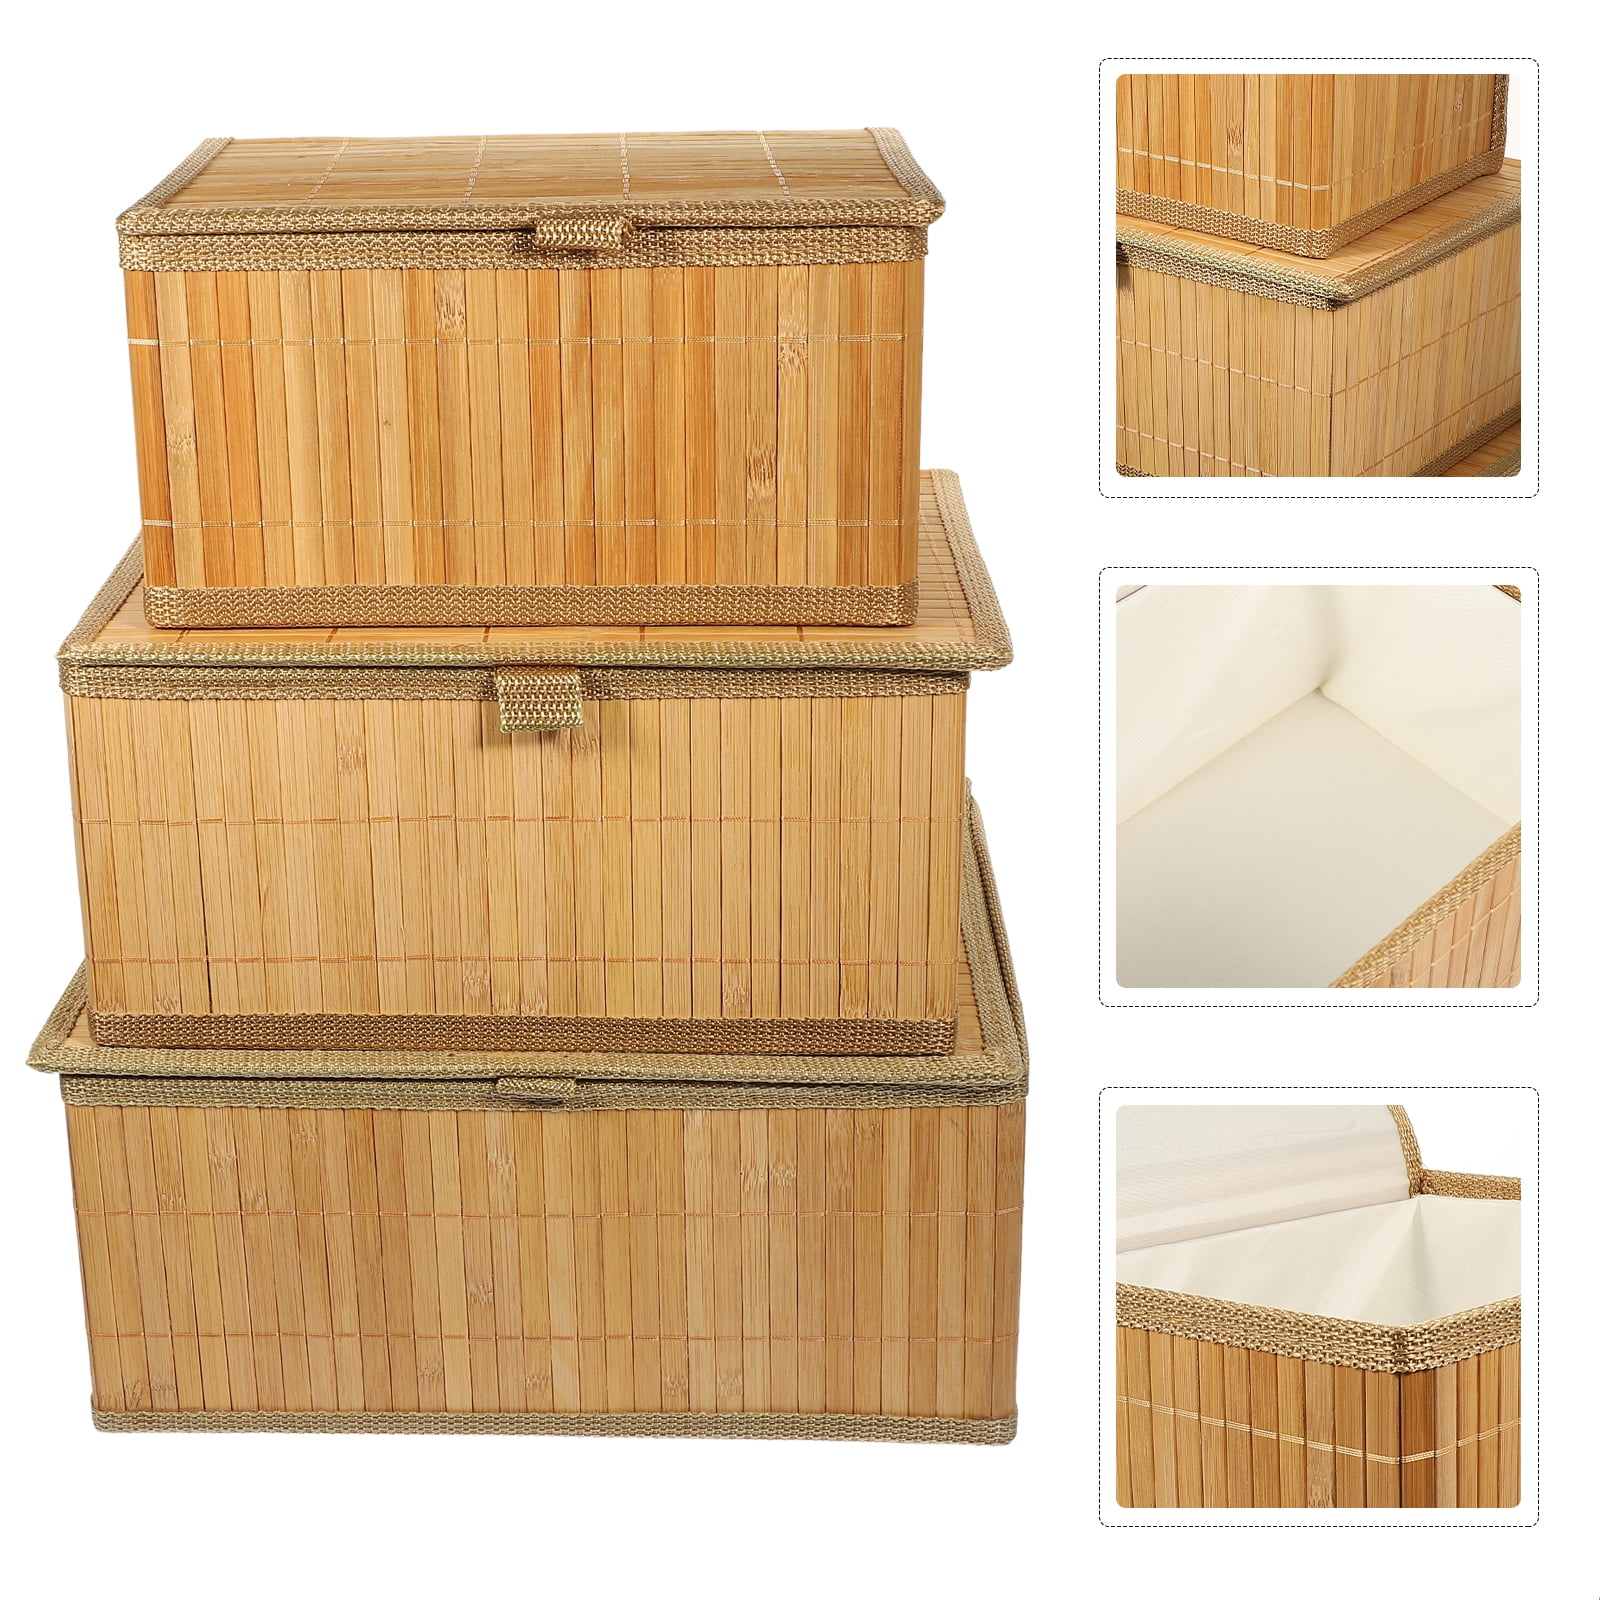 YAHUAN Woven Wooden Basket Wood Storage Crate Box, Decorative Rustic Basket  Bamboo Basket with Built-In Handles for Kitchen Pantry, Cabinet, Office